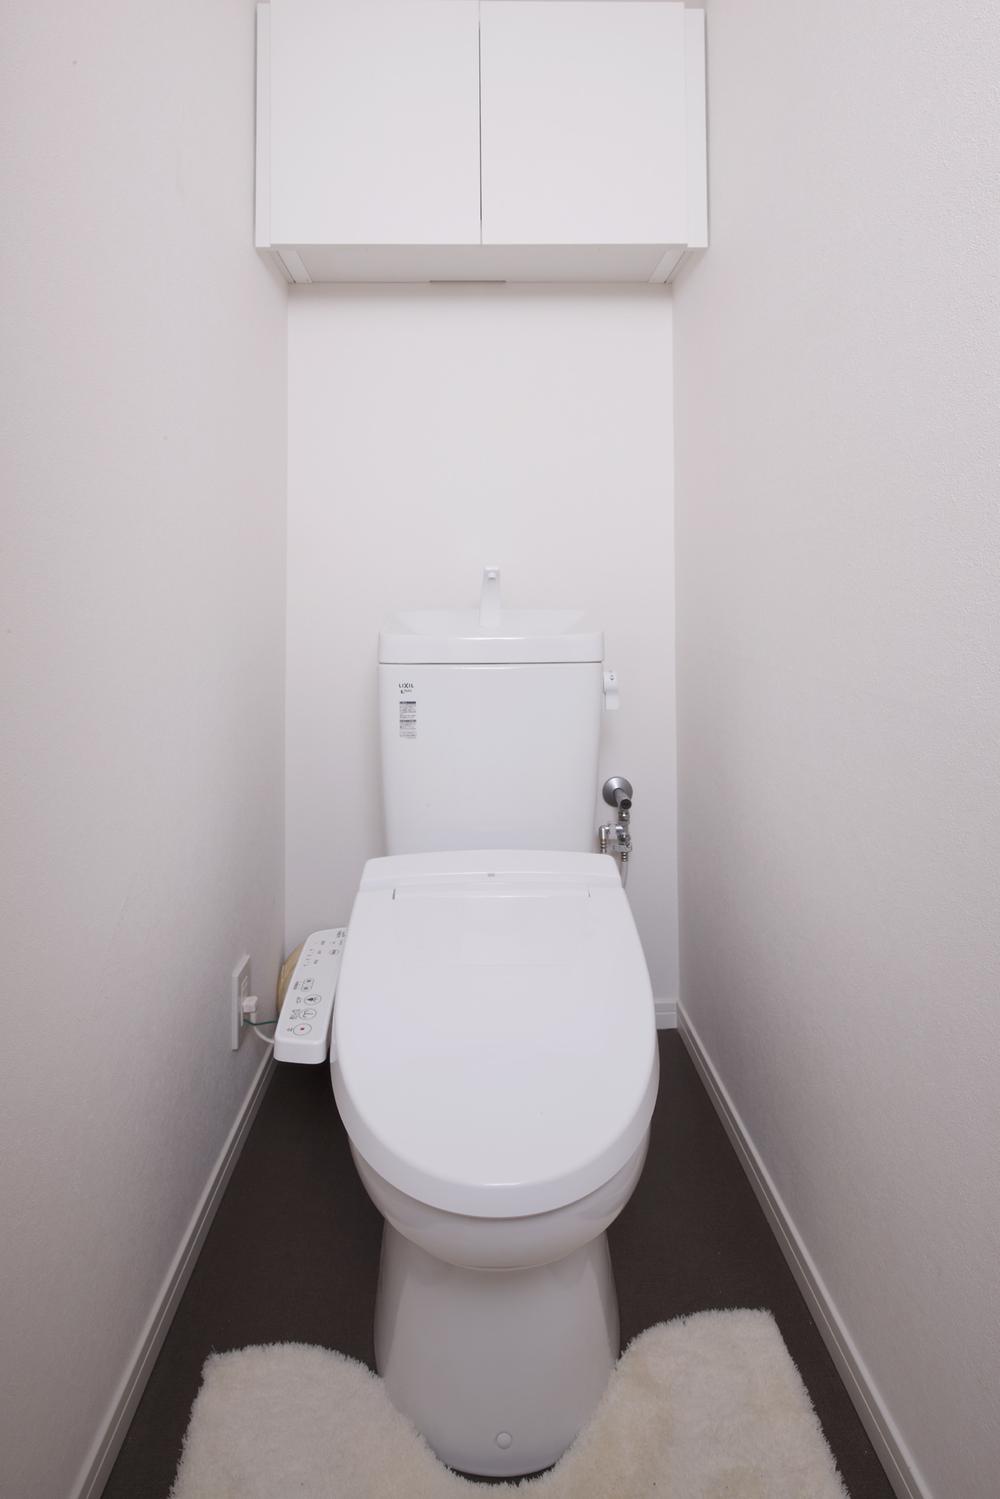 Toilet. toilet 2013 September D type 505, Room shooting furniture ・ Furnishings are not included in the sale price